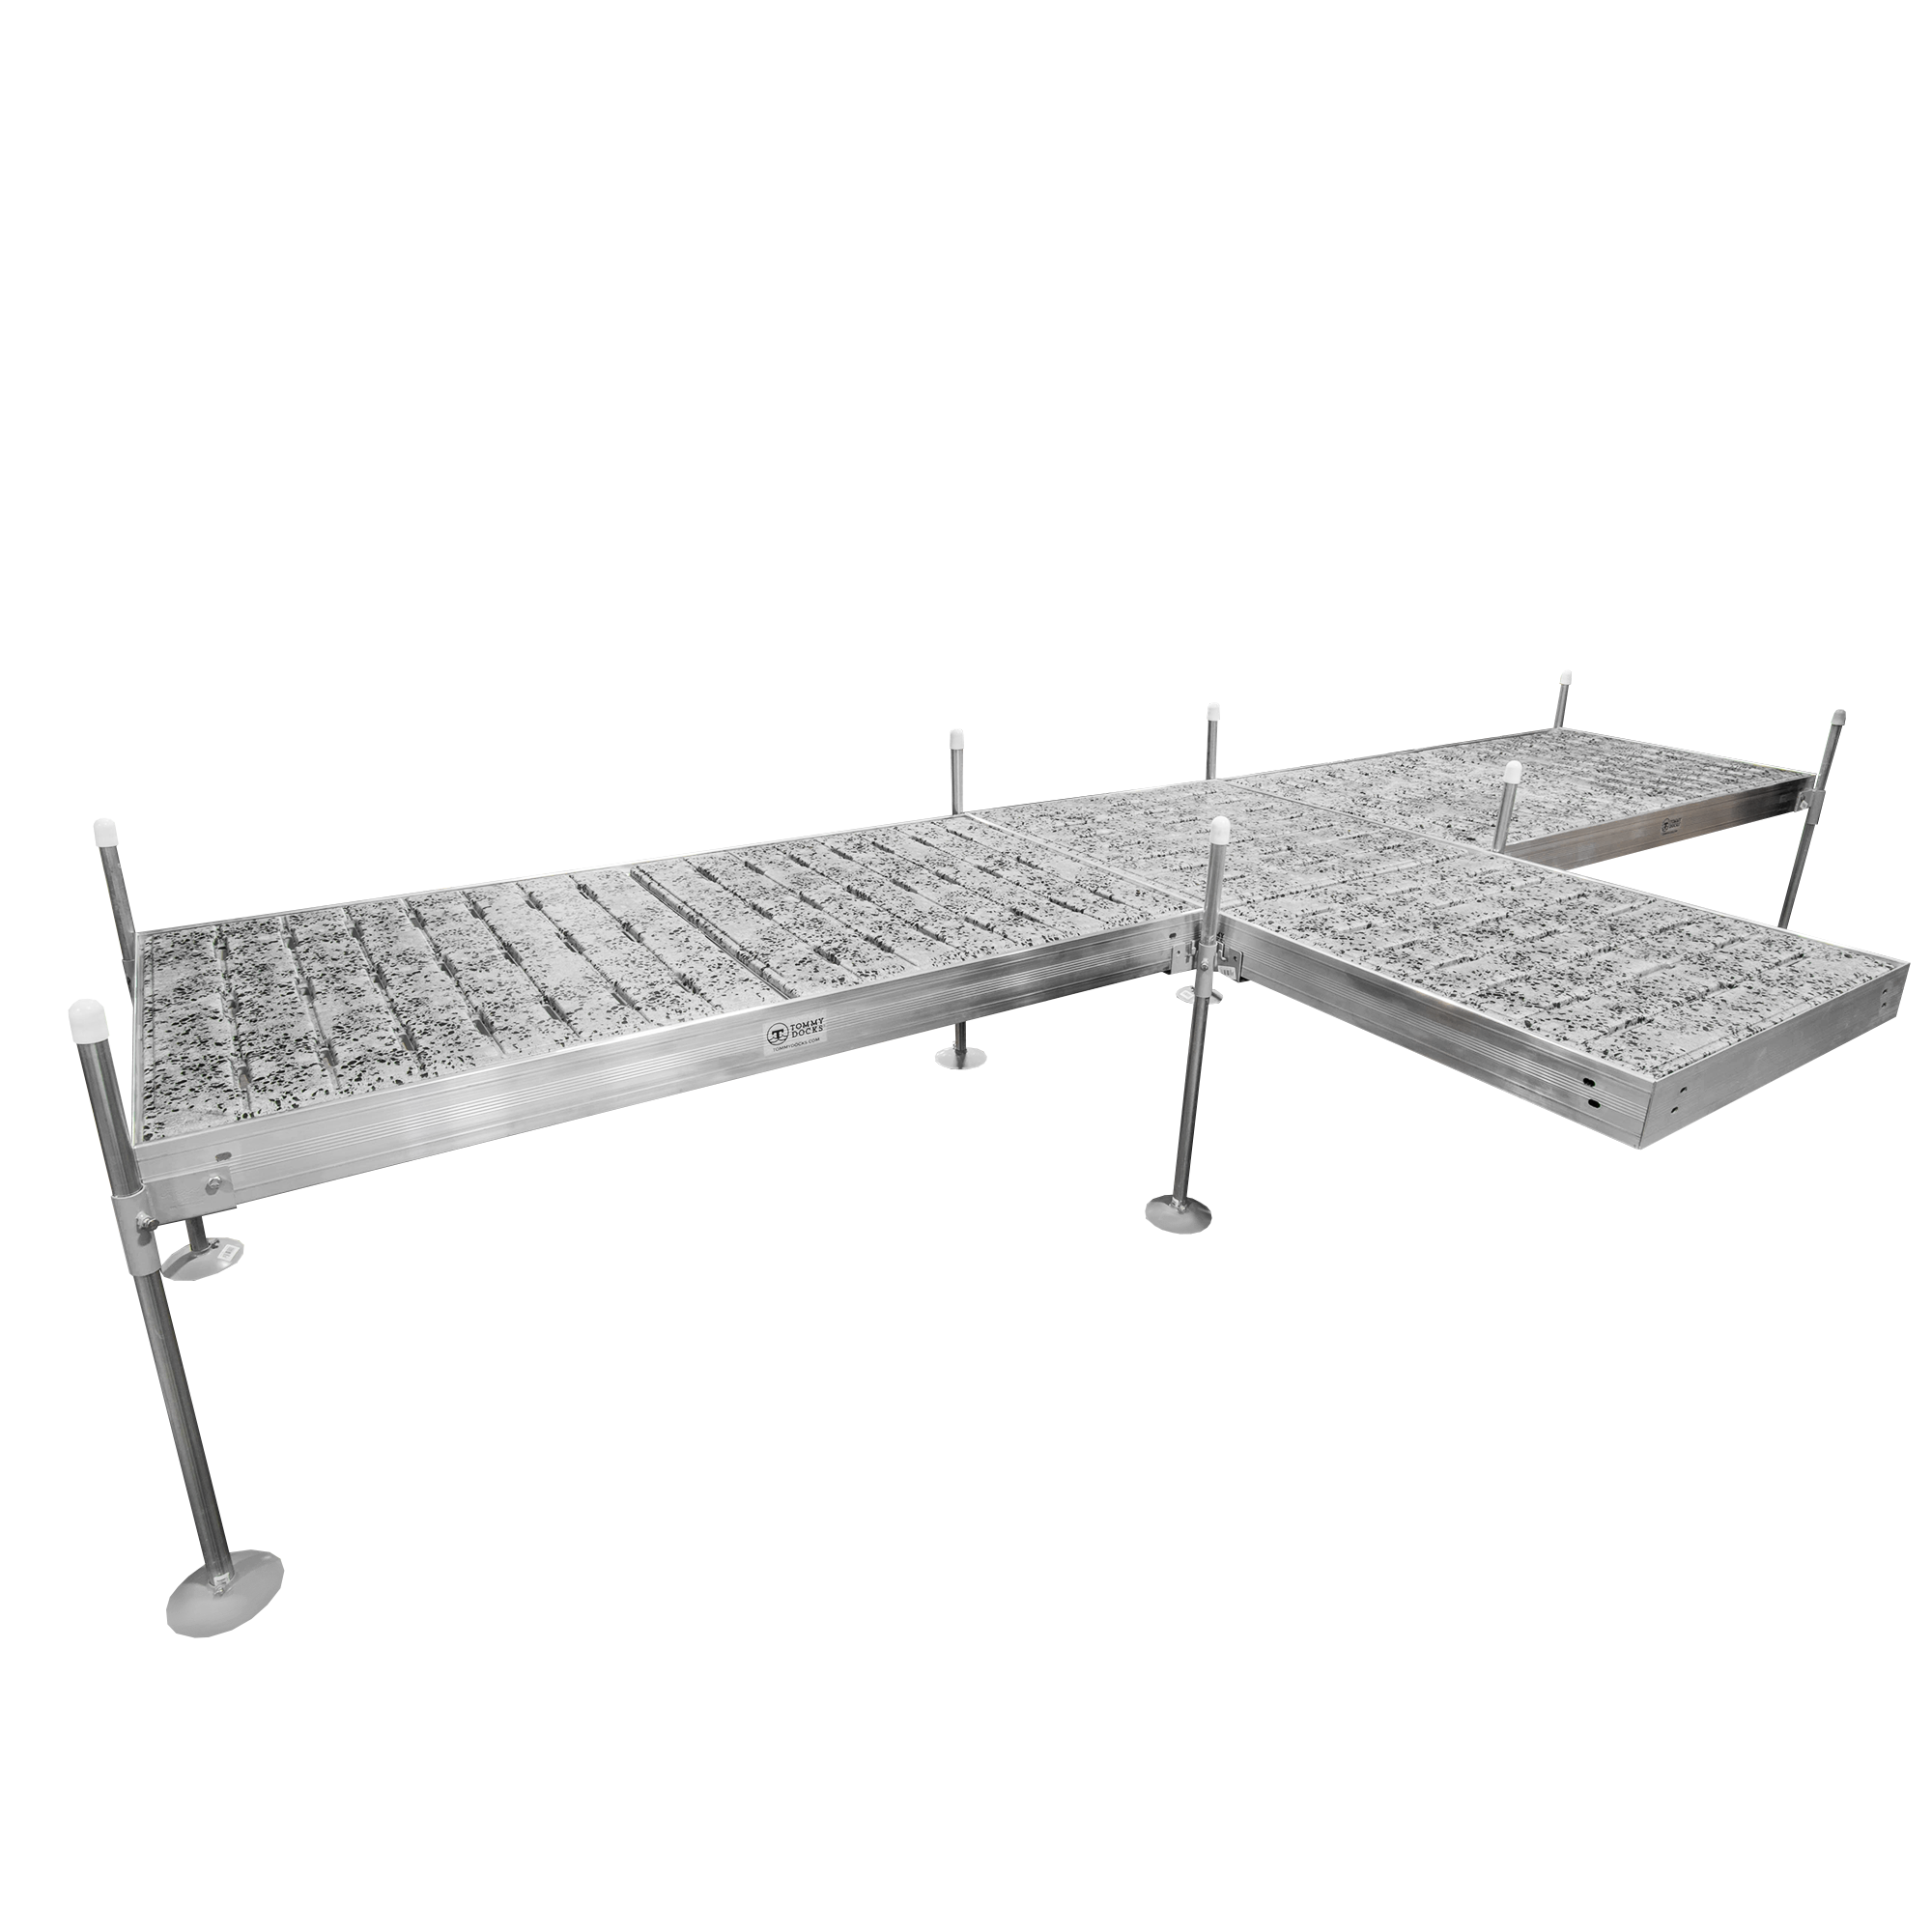 8' T-Shaped Boat Dock System with Aluminum Frame and Thermoformed Terrazzo Decking